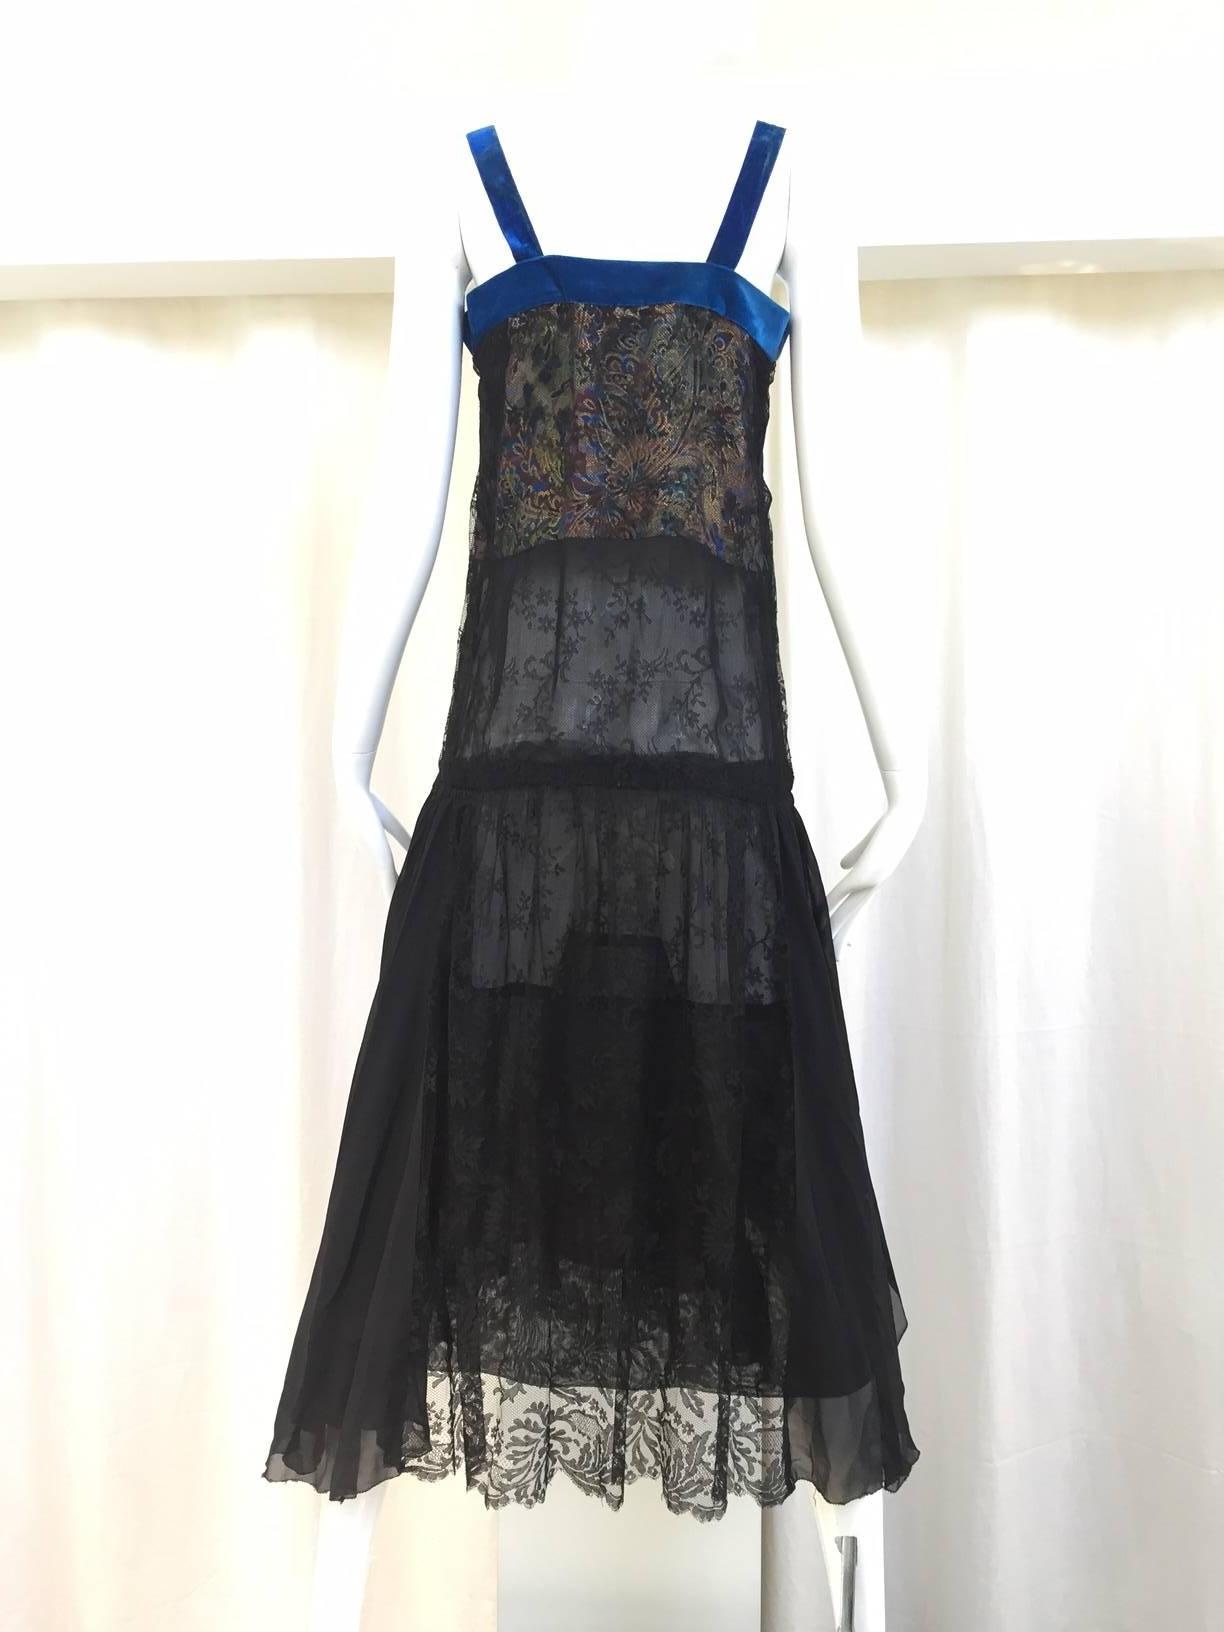 Beautiful Art deco 1920s black lace dress with metallic silk brocade inset and blue velvet strap. Perfect for Downtown abbey costume party .no zipper. Slip on dress. 
Bust: 34